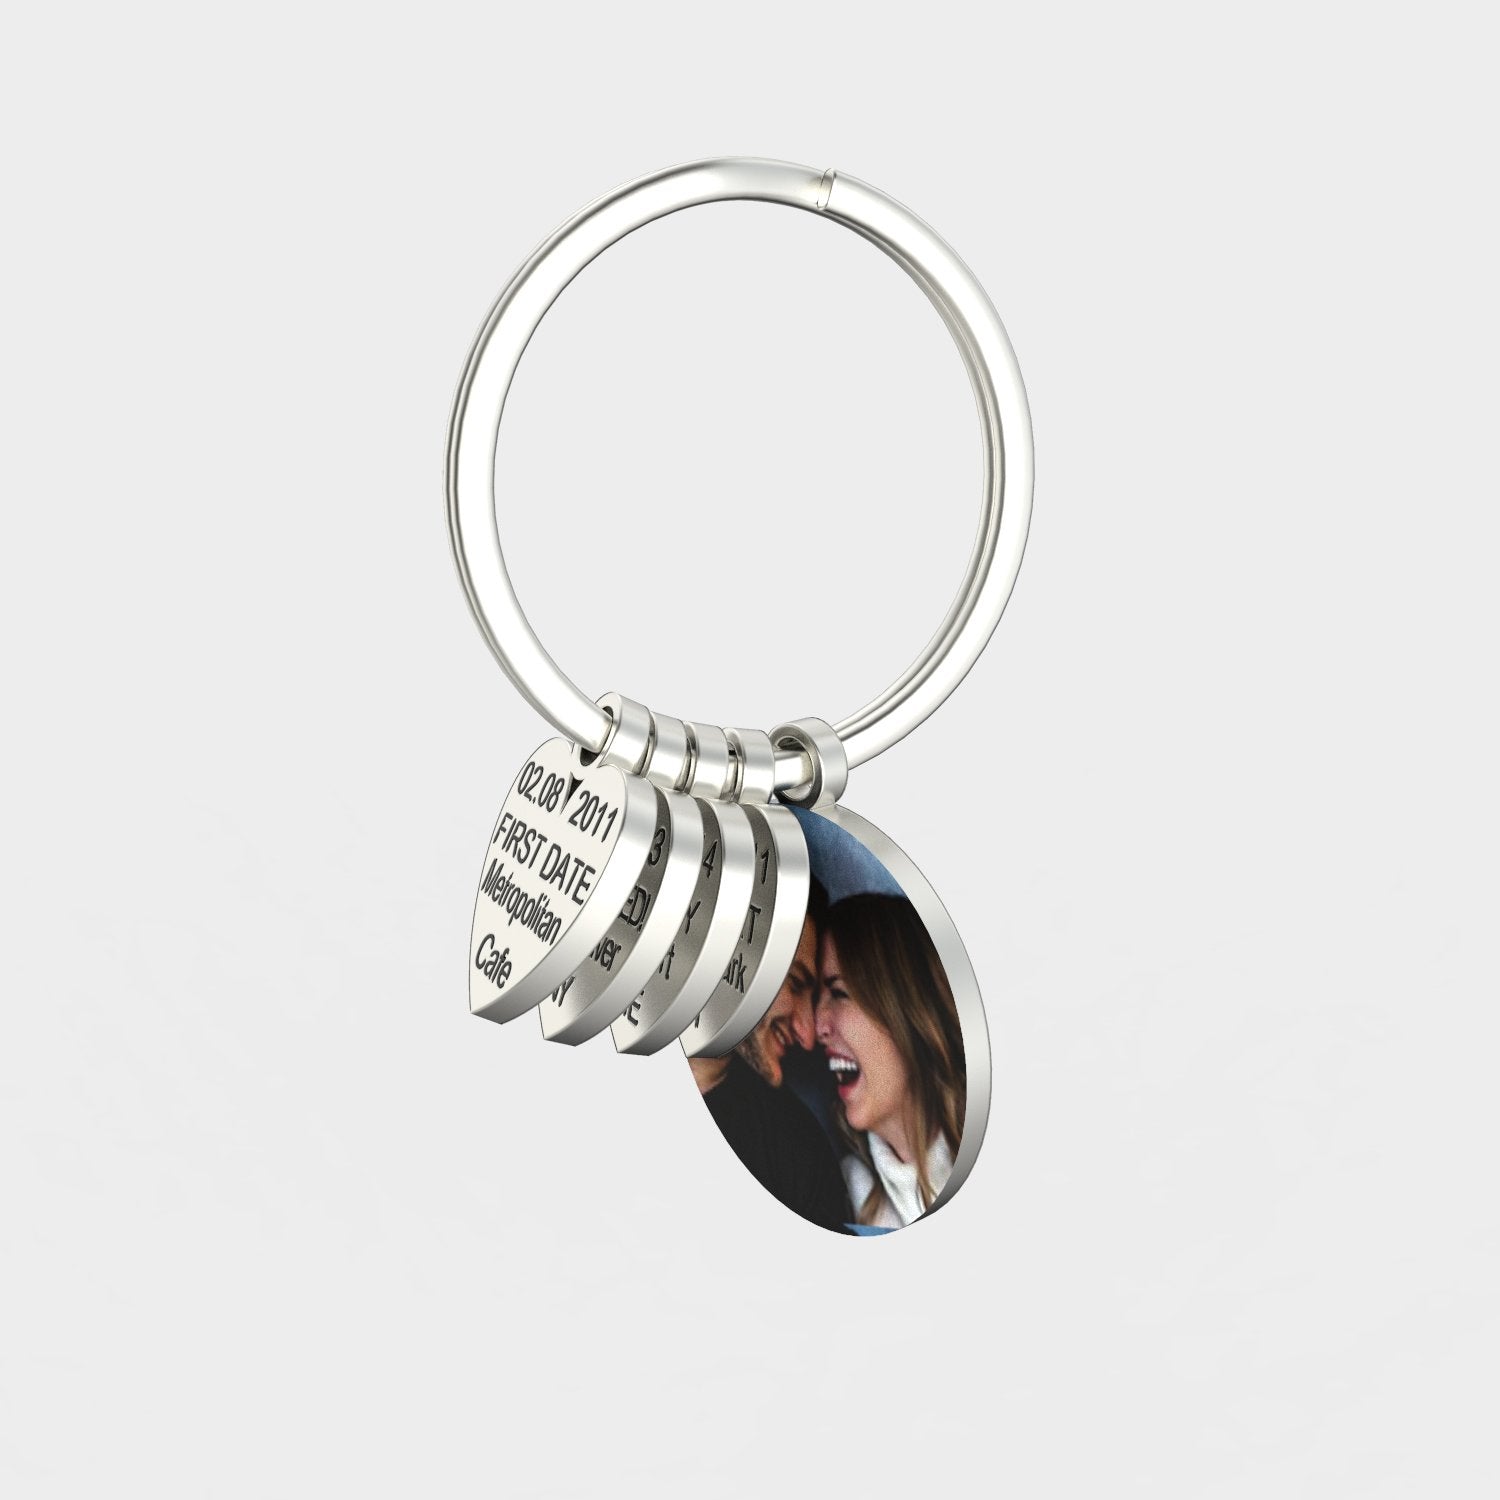 "Our Memory" Personalized Engraved Photo Keychain with Sweetheart Charm